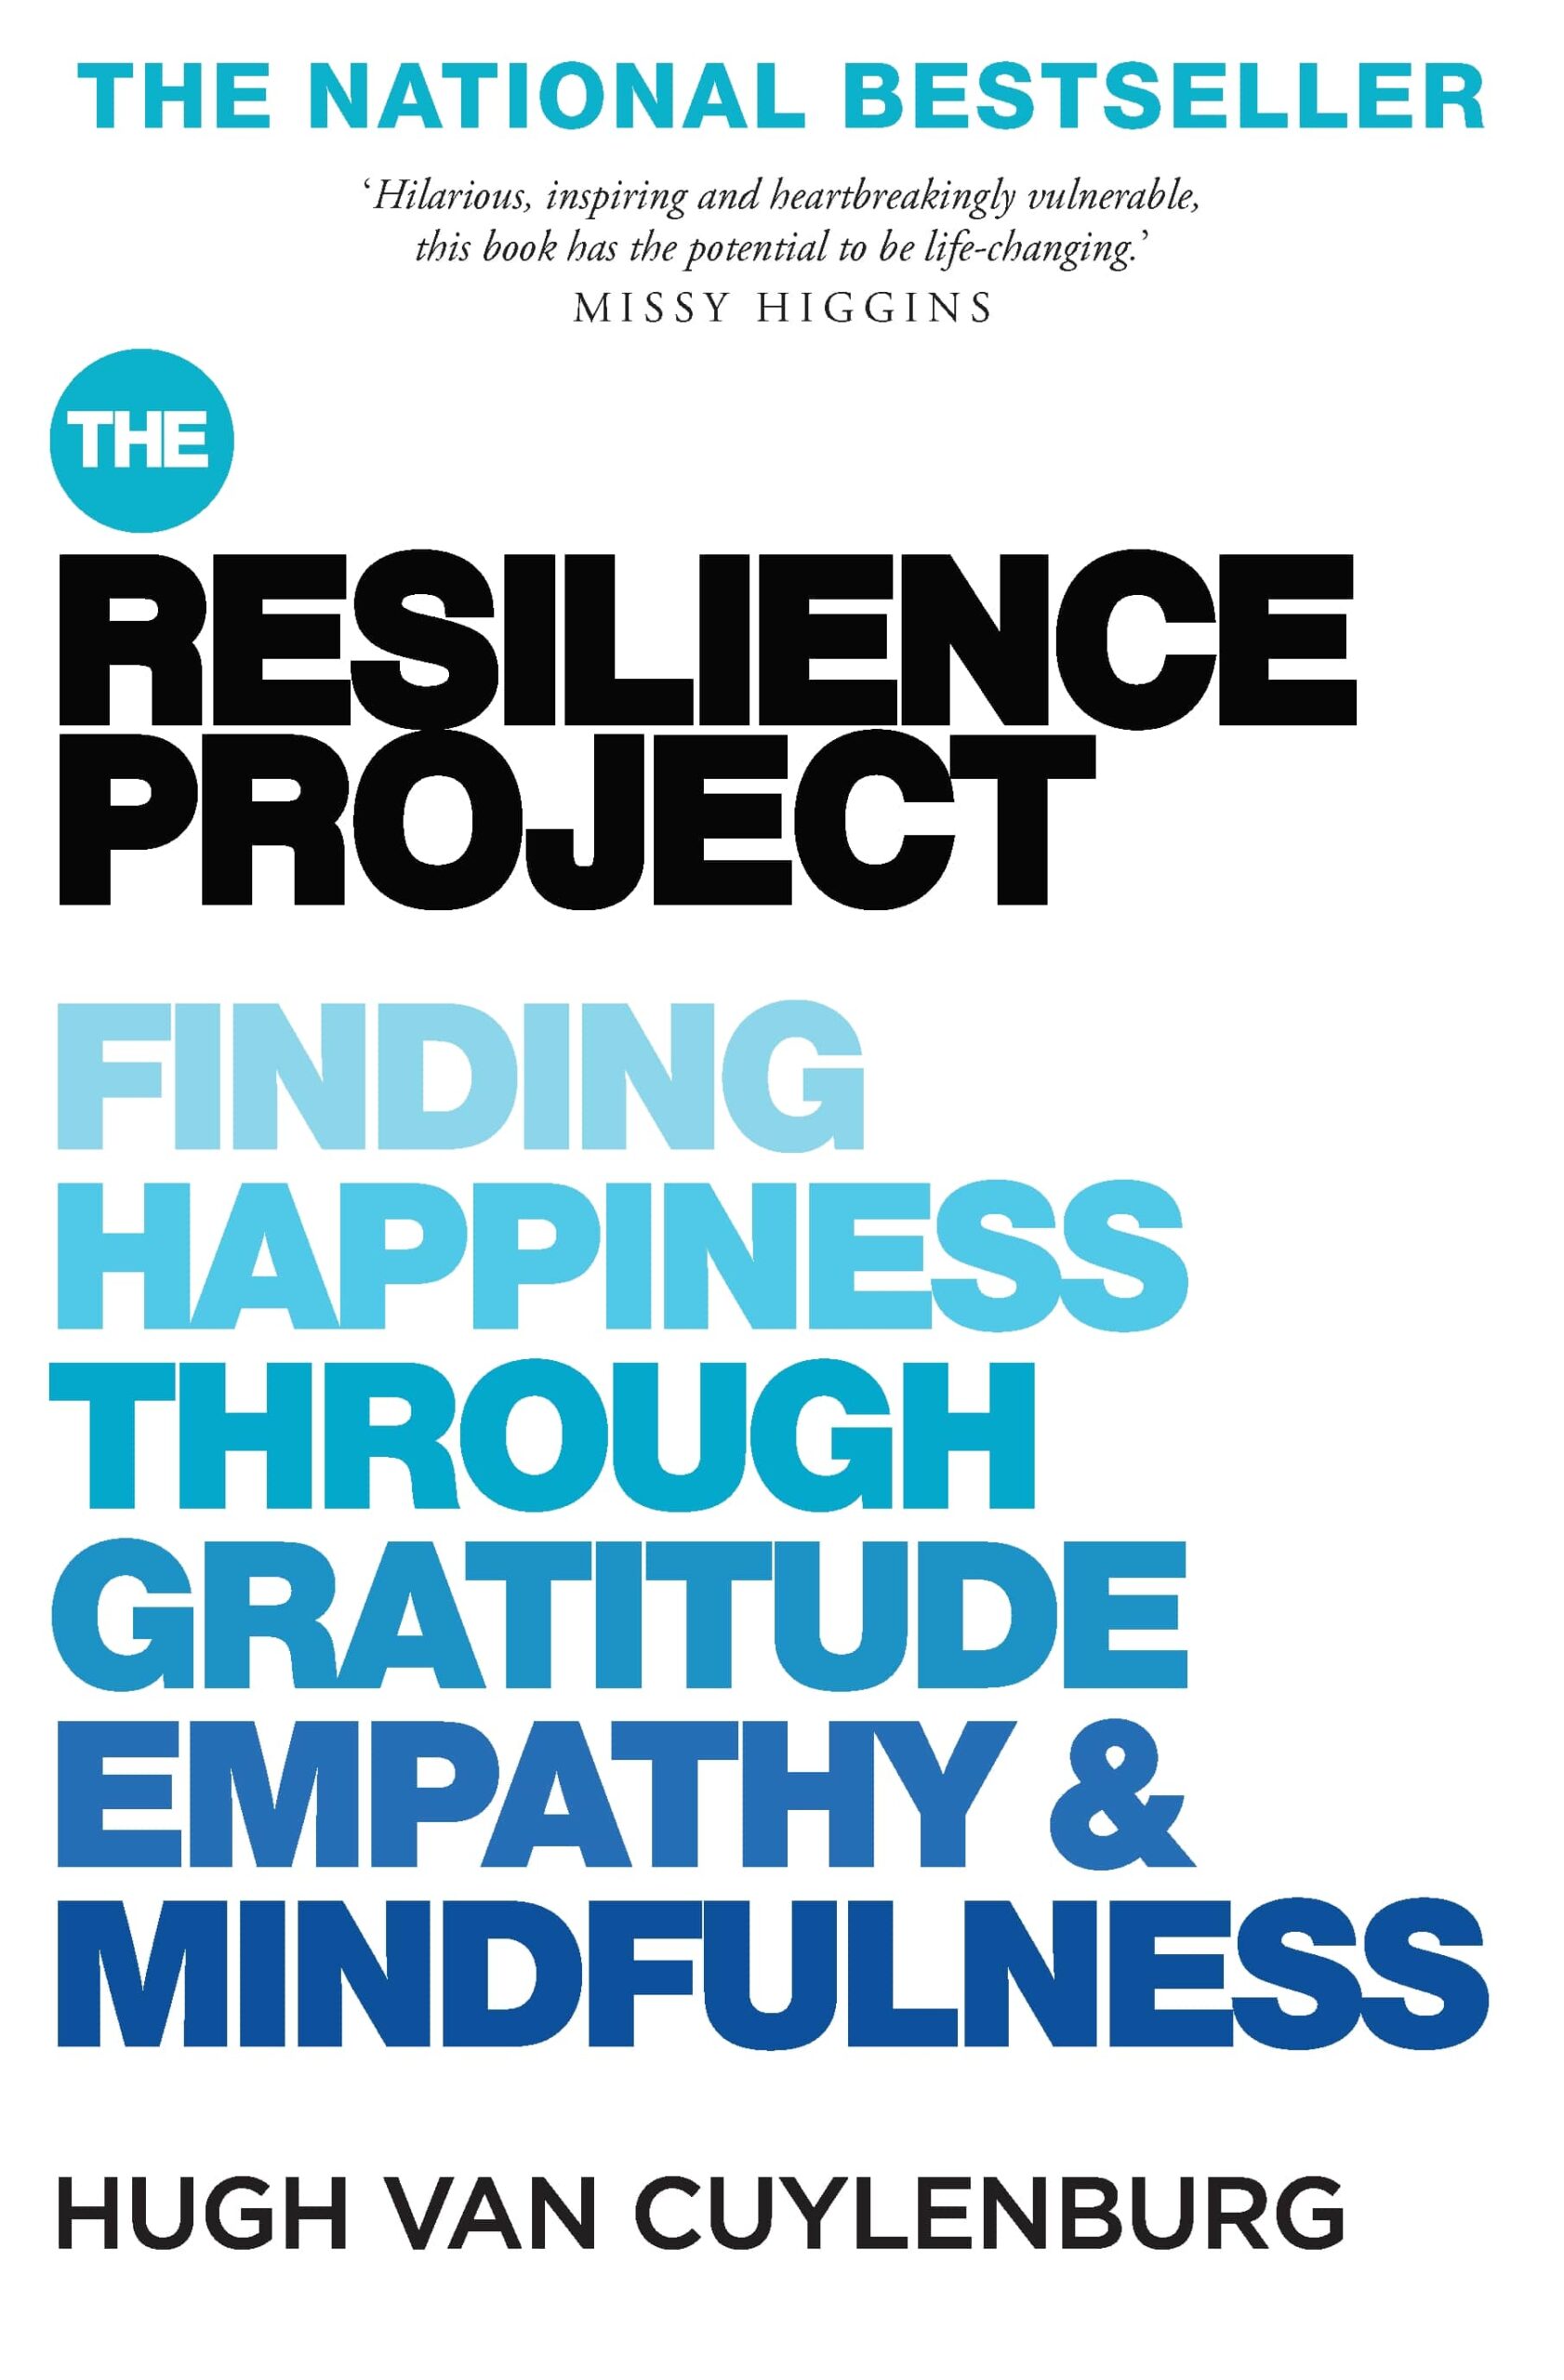 The Resilience Project – Discovering kindness through simplicity